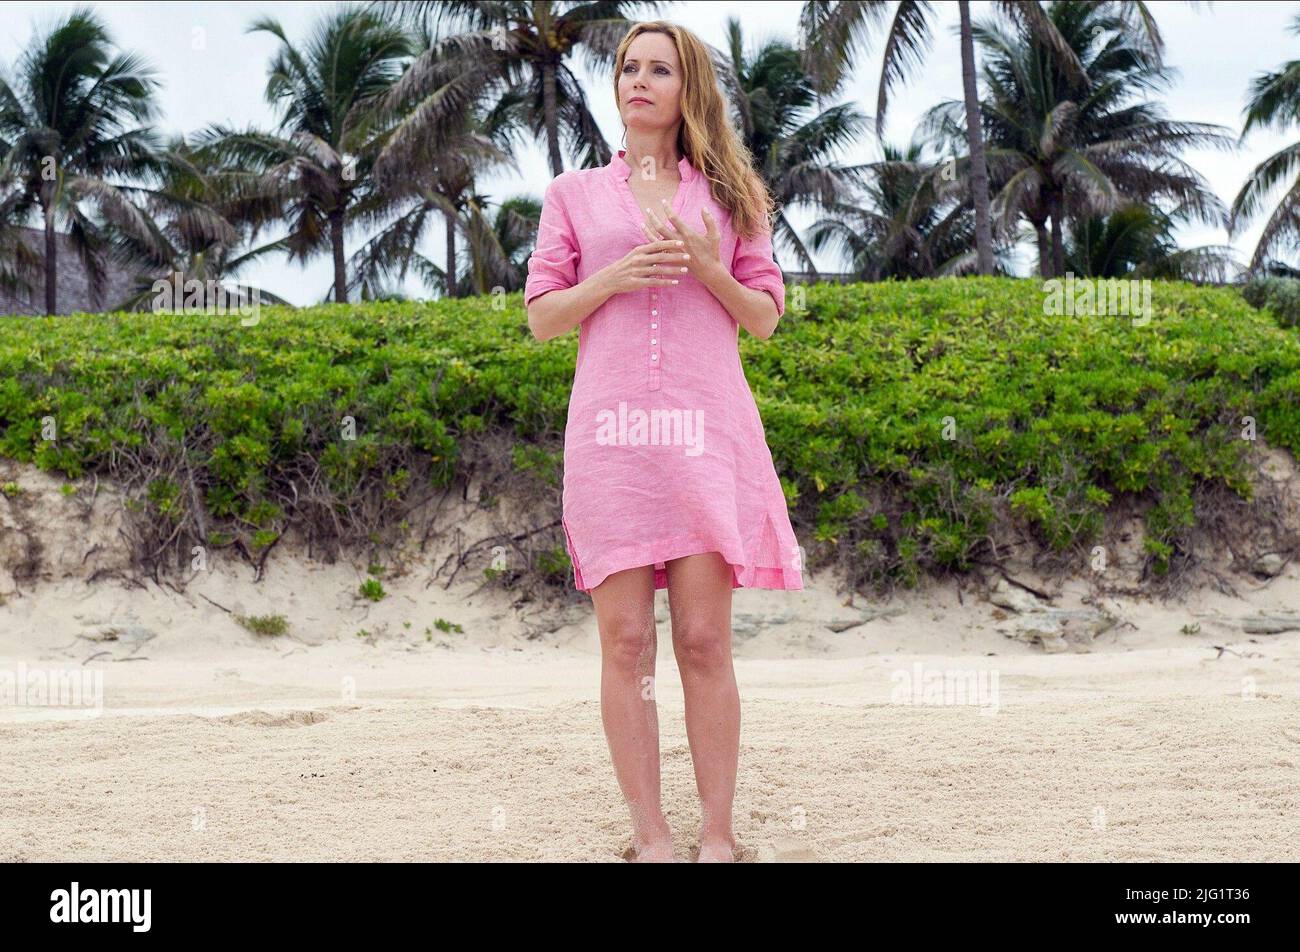 LESLIE MANN, THE OTHER WOMAN, 2014 Stock Photo - Alamy